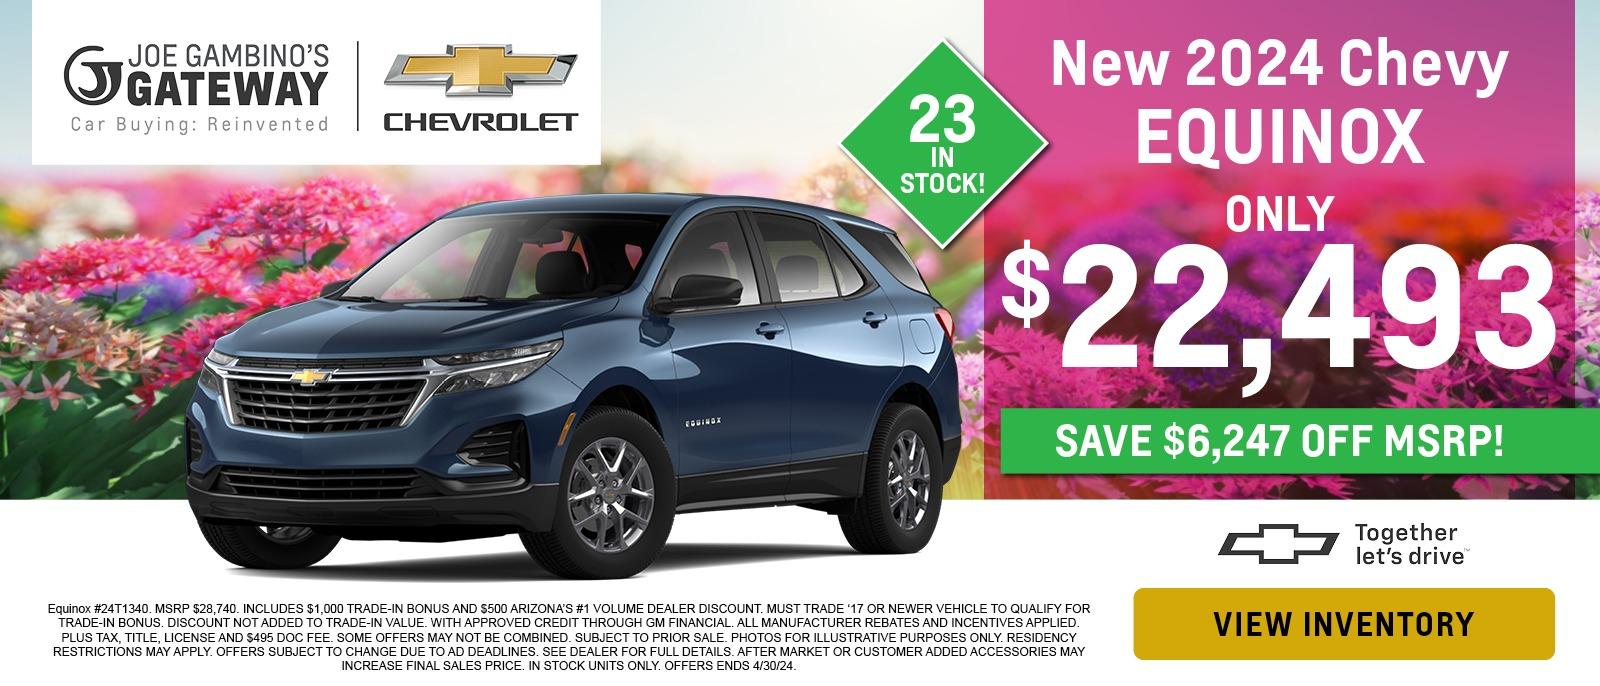 New 2024 Chevy Equinox
Only $22,493
Save $6,247 off MSRP!